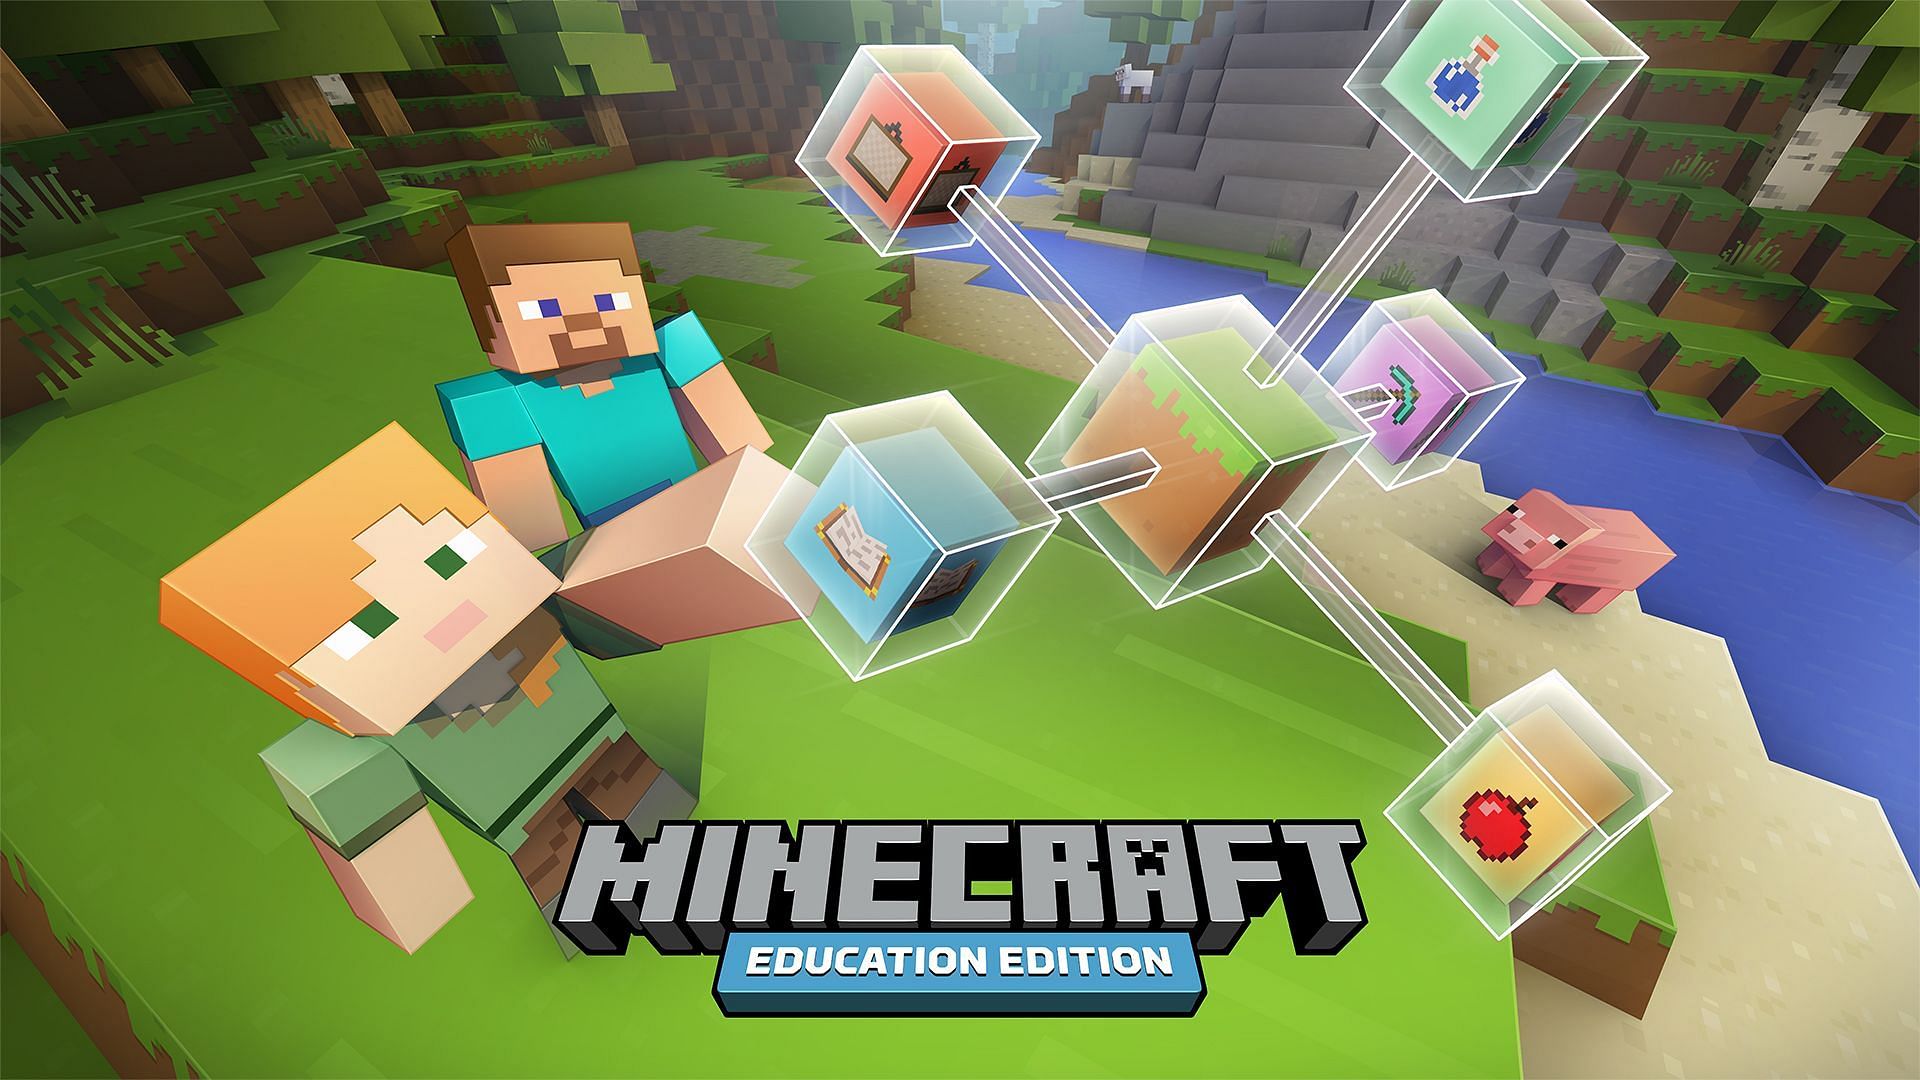 The official promotional art for Minecraft Education Edition